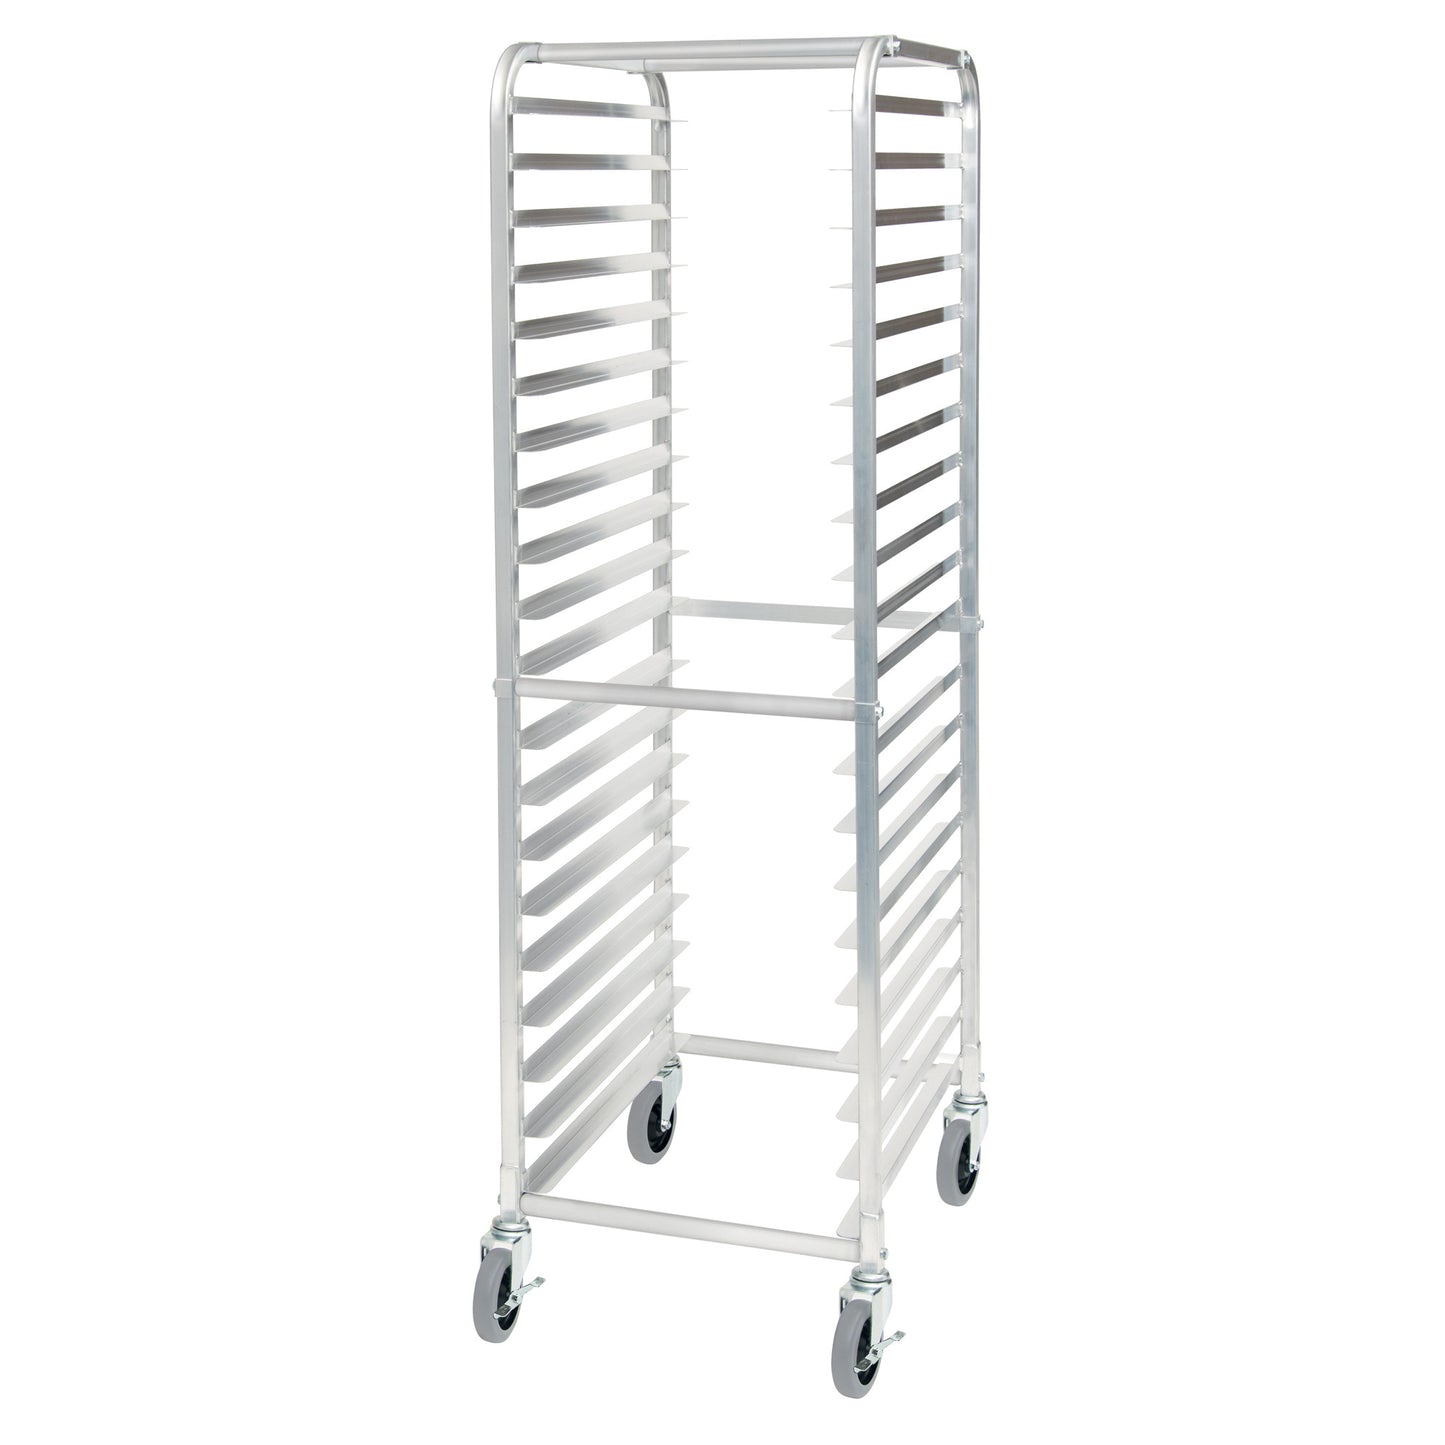 ALRK-20R - 20-Tier Economy End-Load Sheet Pan Rack with Brakes - 3" Spacing